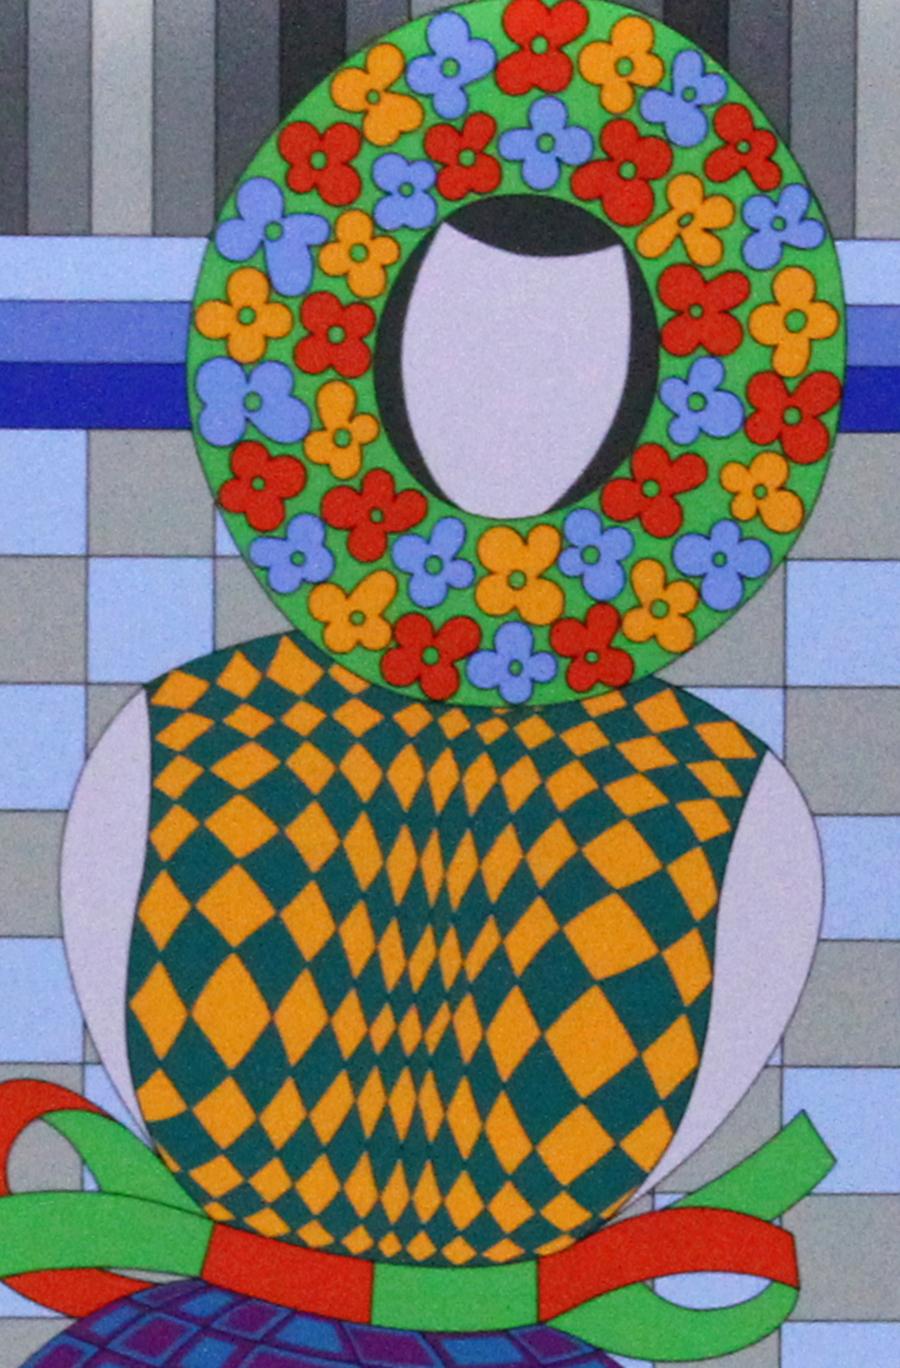 Artist: Victor Vasarely, Hungarian (1908 - 1997)
Title: Fille Fleur
Year: circa 1980
Medium: Serigraph, signed and numbered in pencil
Edition: FV 38/56
Size: 26 in. x 16 in. (66.04 cm x 40.64 cm)